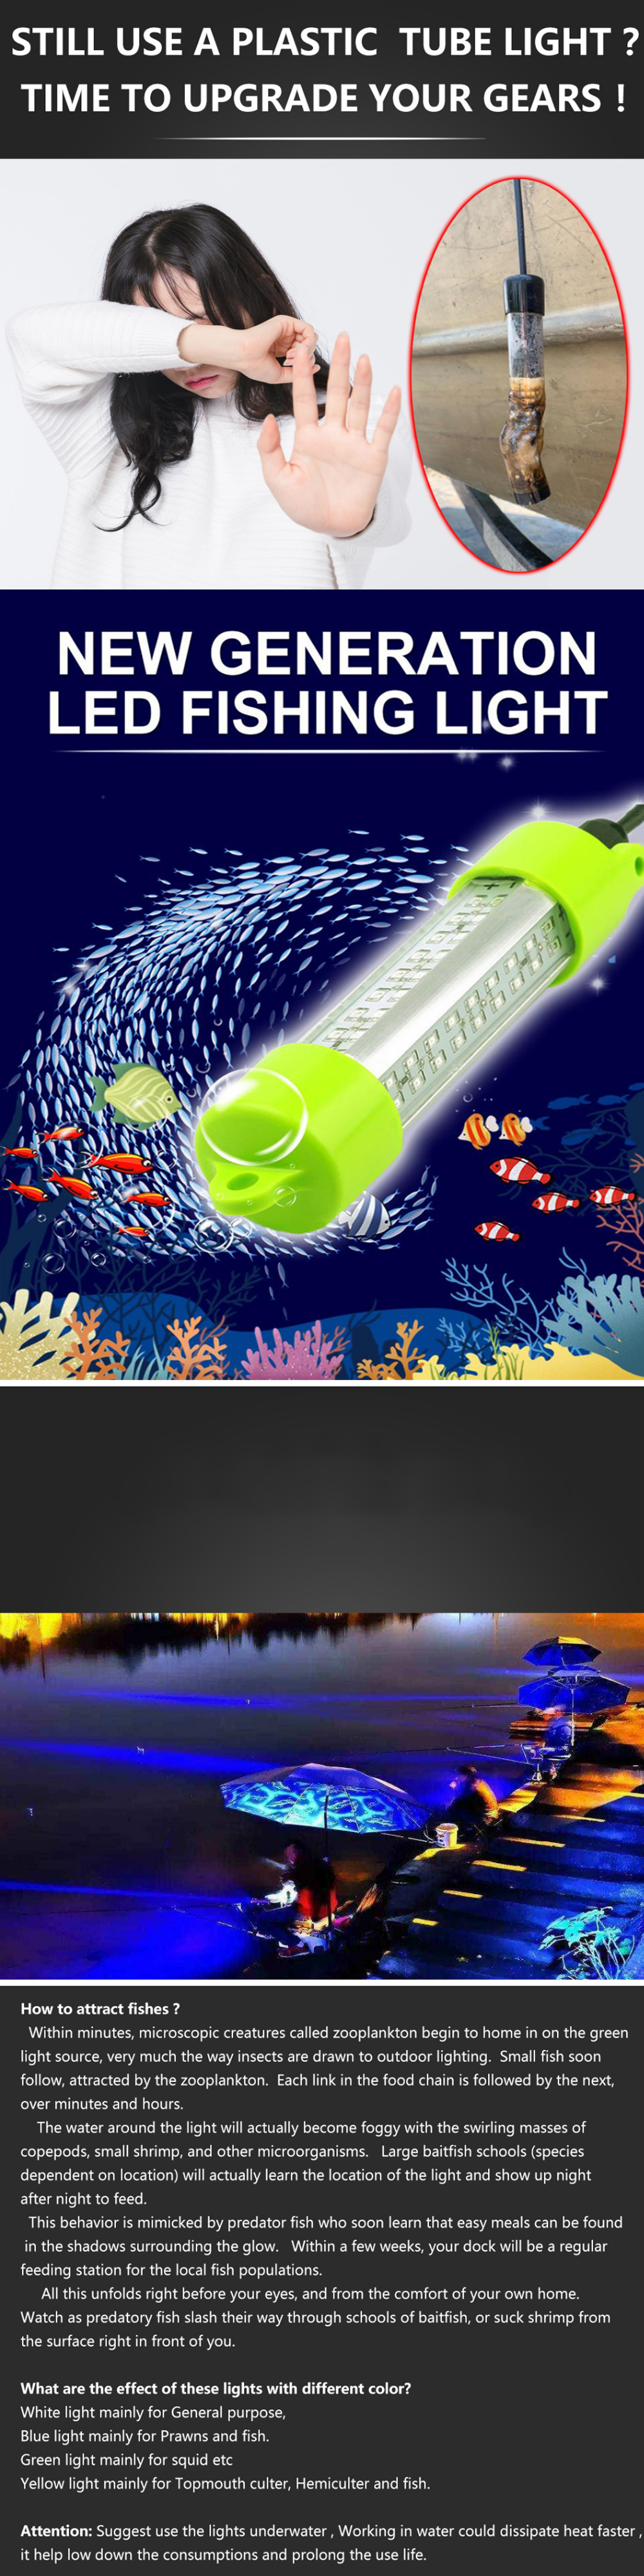 ZANLURE-160W-6-Sides-Green-White-Blue-Yellow-Aluminum-High-Power-LED-Fish-Submersible-Underwater-Fis-1842708-1